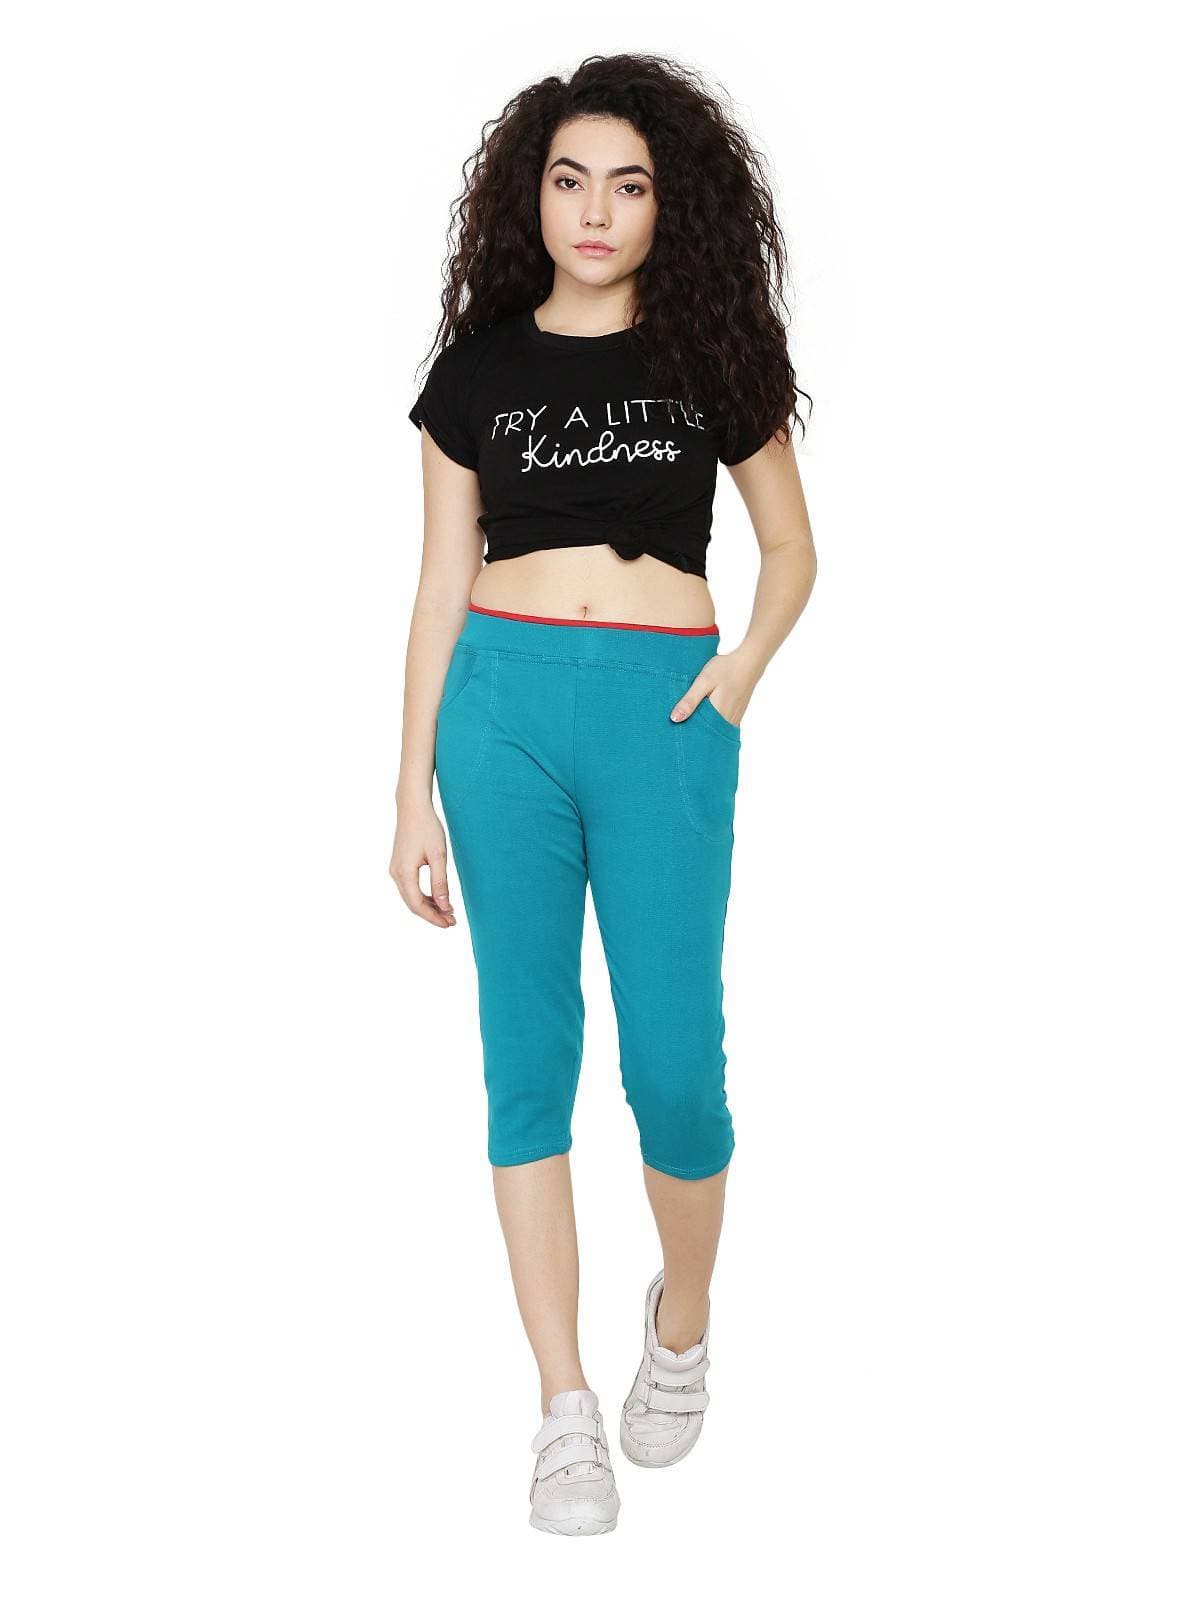 Asmaani Turquoise Color Capri Type with Two Side Pockets.